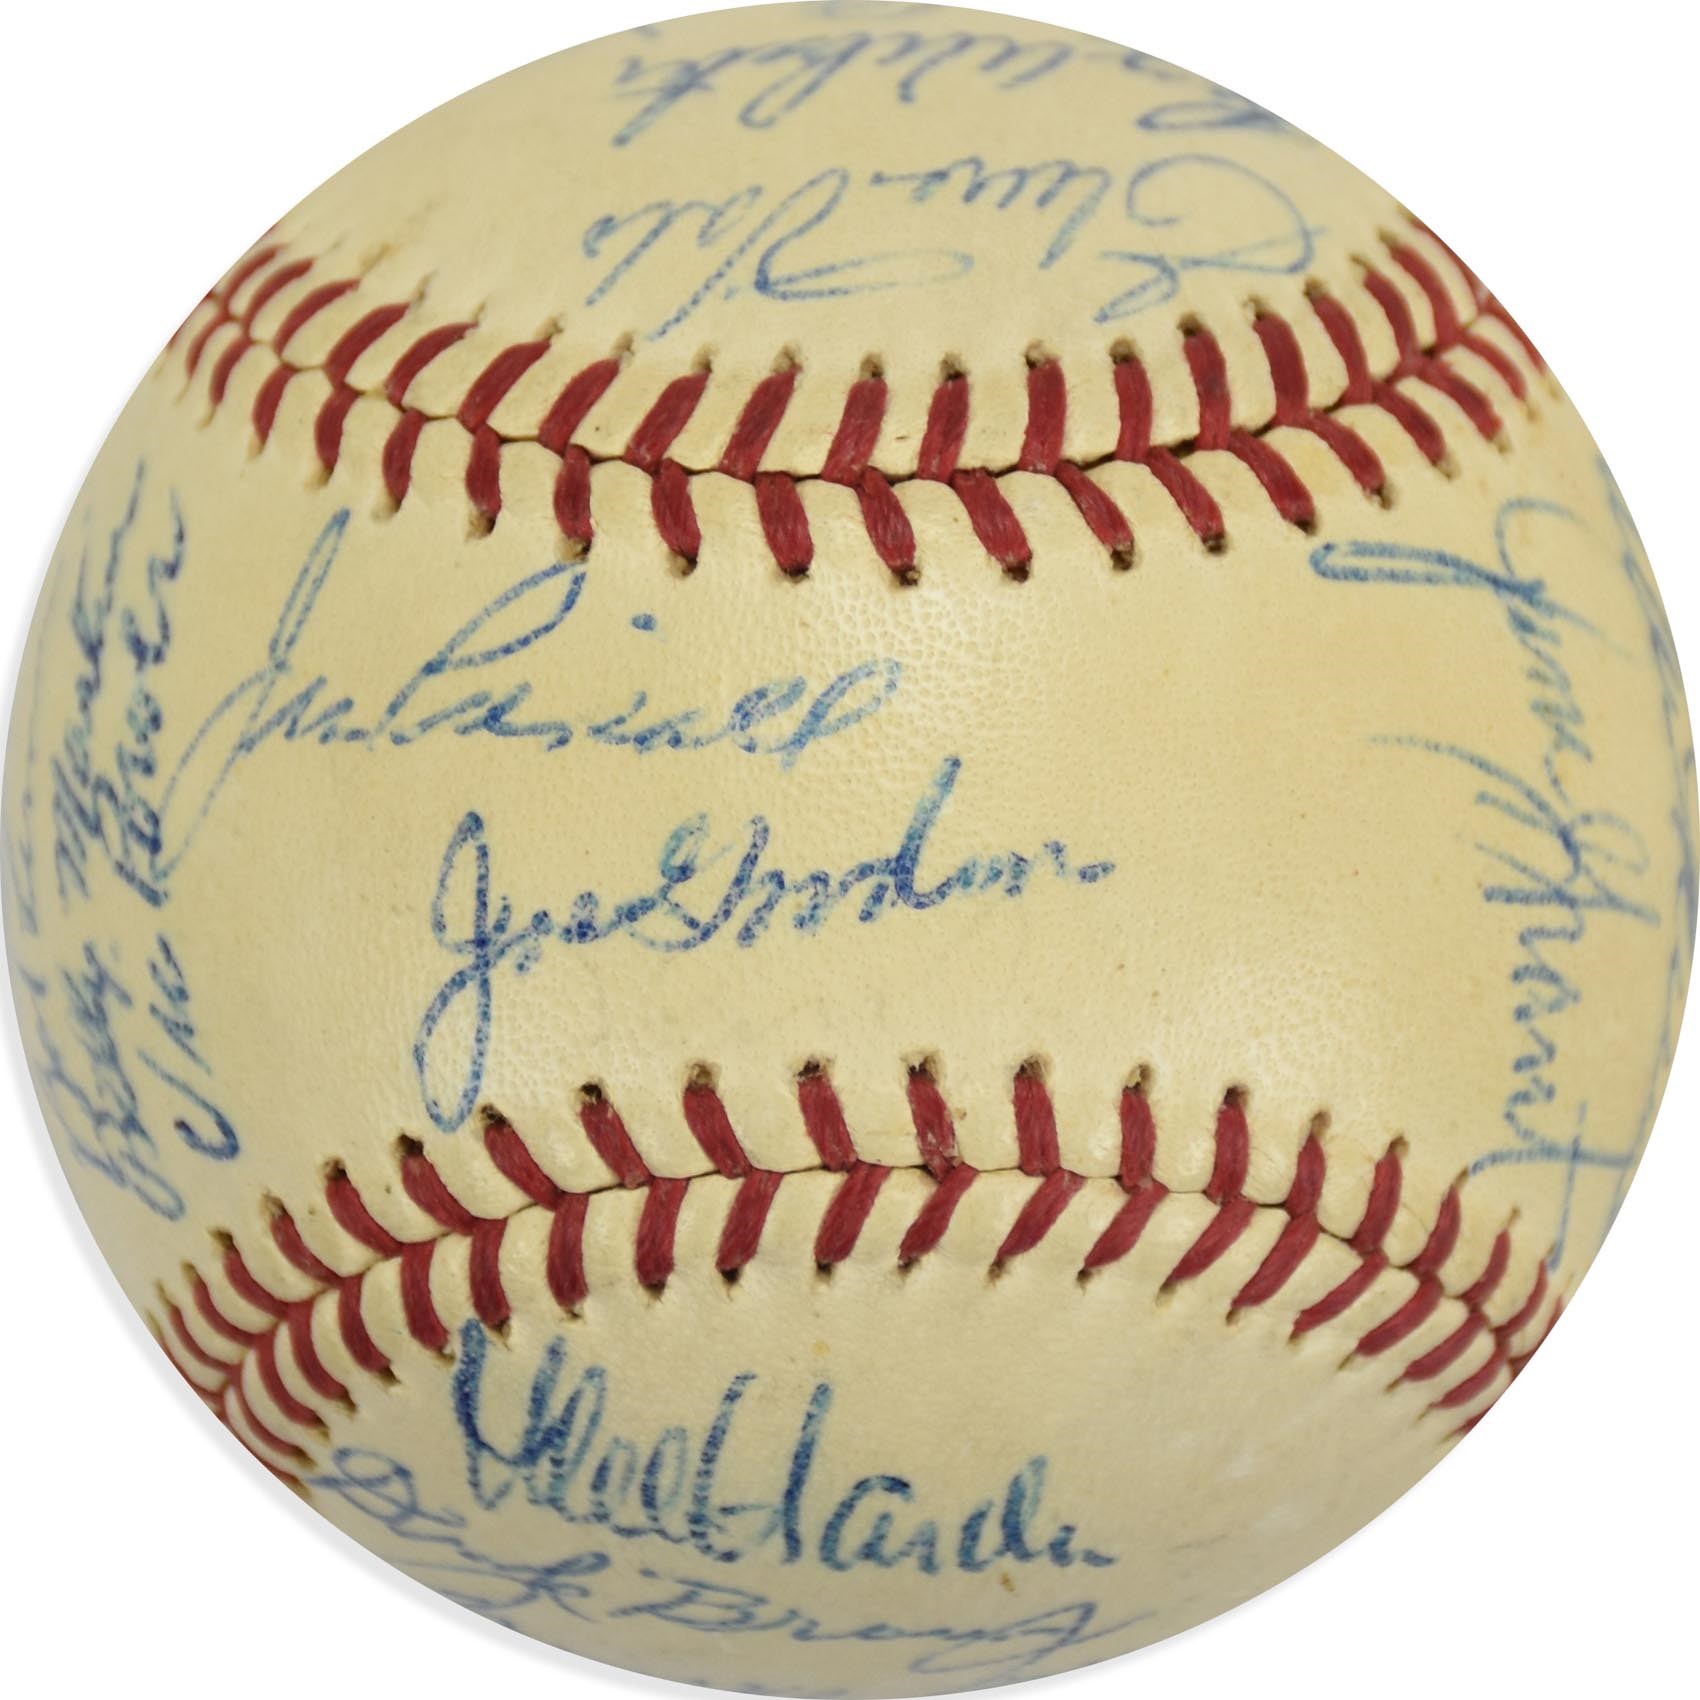 - 1959 Cleveland Indians Team Signed Baseball with Lemon and Billy Martin (PSA)